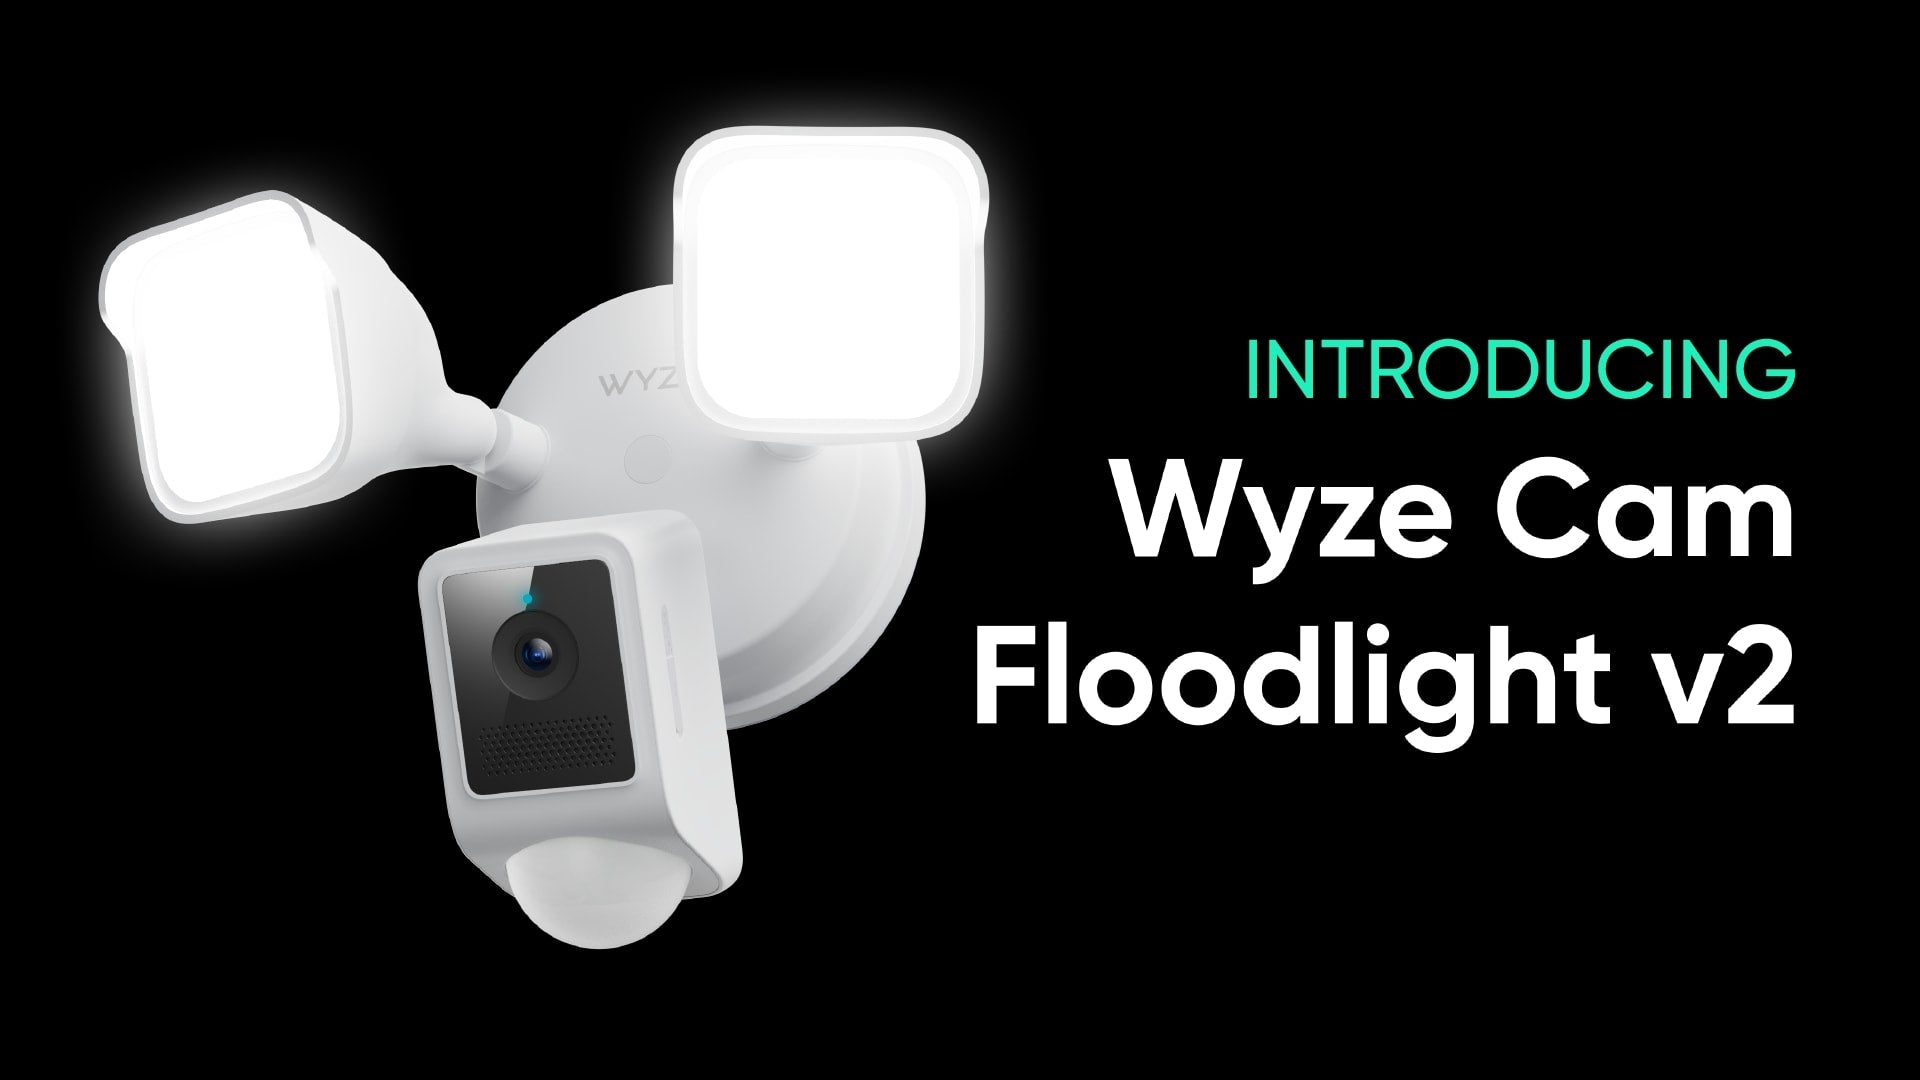 Load video: Commercial video of Wyze Cam Floodlight v2